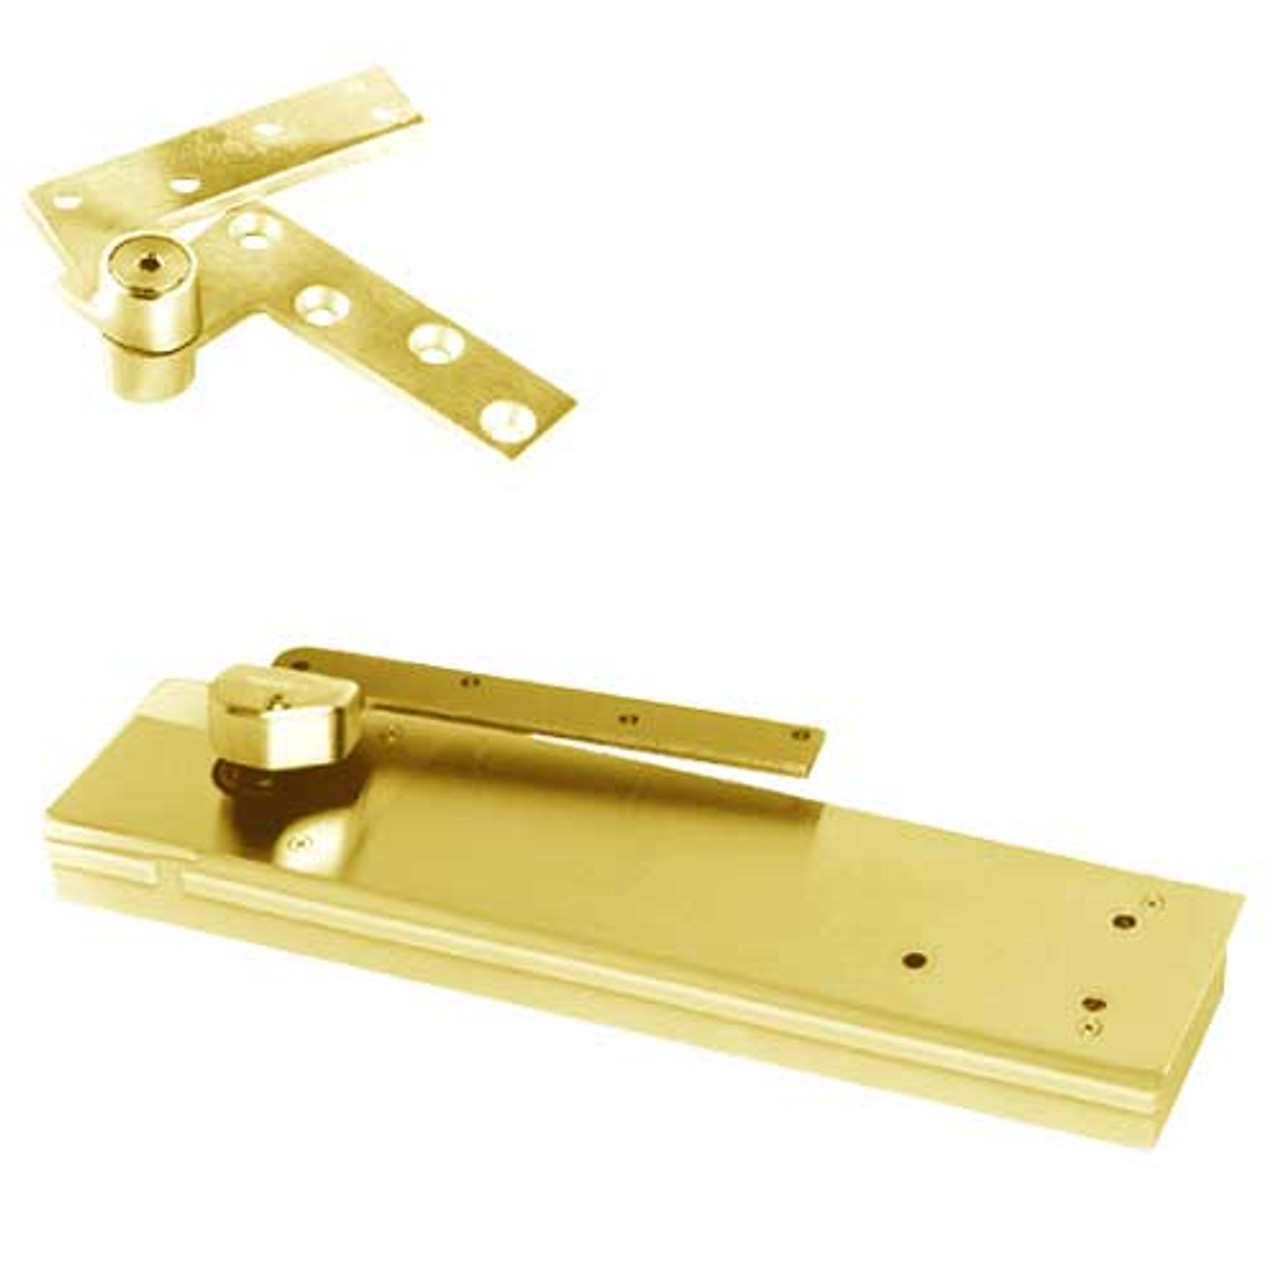 5103ABC105-1-1/2OS-LFP-LTP-RH-605 Rixson 51 Series 1-1/2" Offset Hung Shallow Depth Floor Closers in Bright Brass Finish